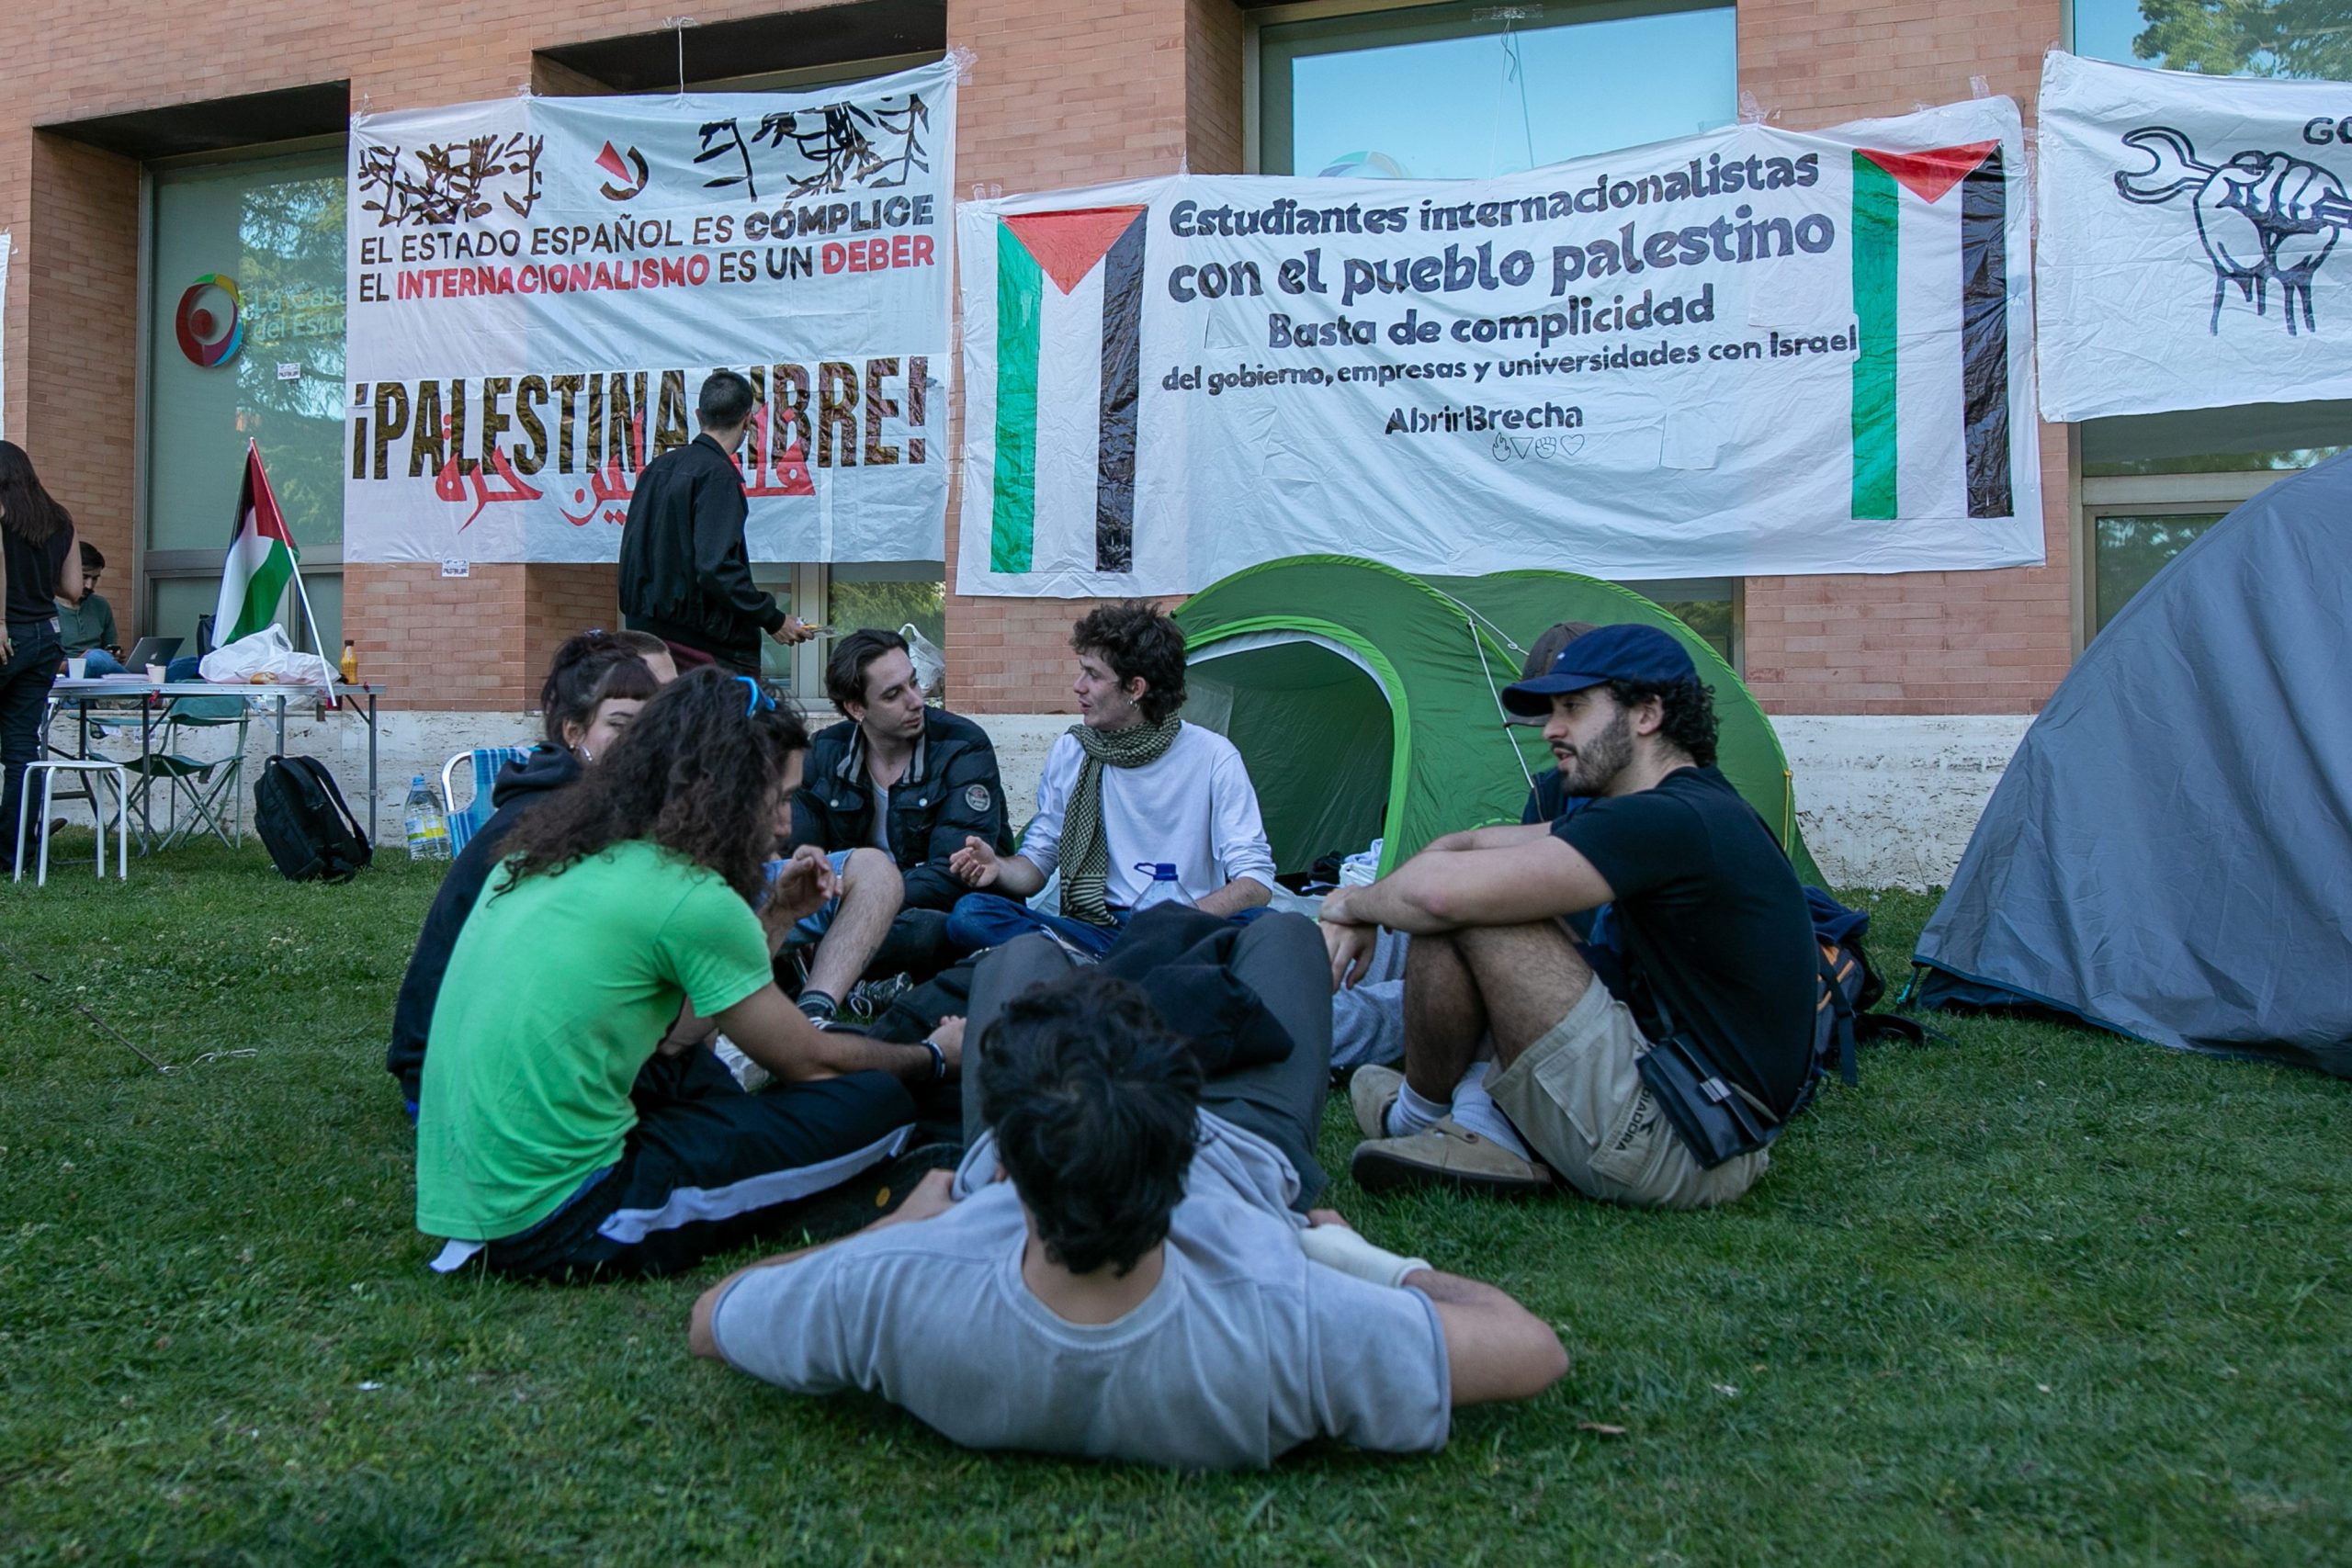 Madrid students join a growing number of protest camps across Spain calling for an end to the conflict in Gaza [Video]